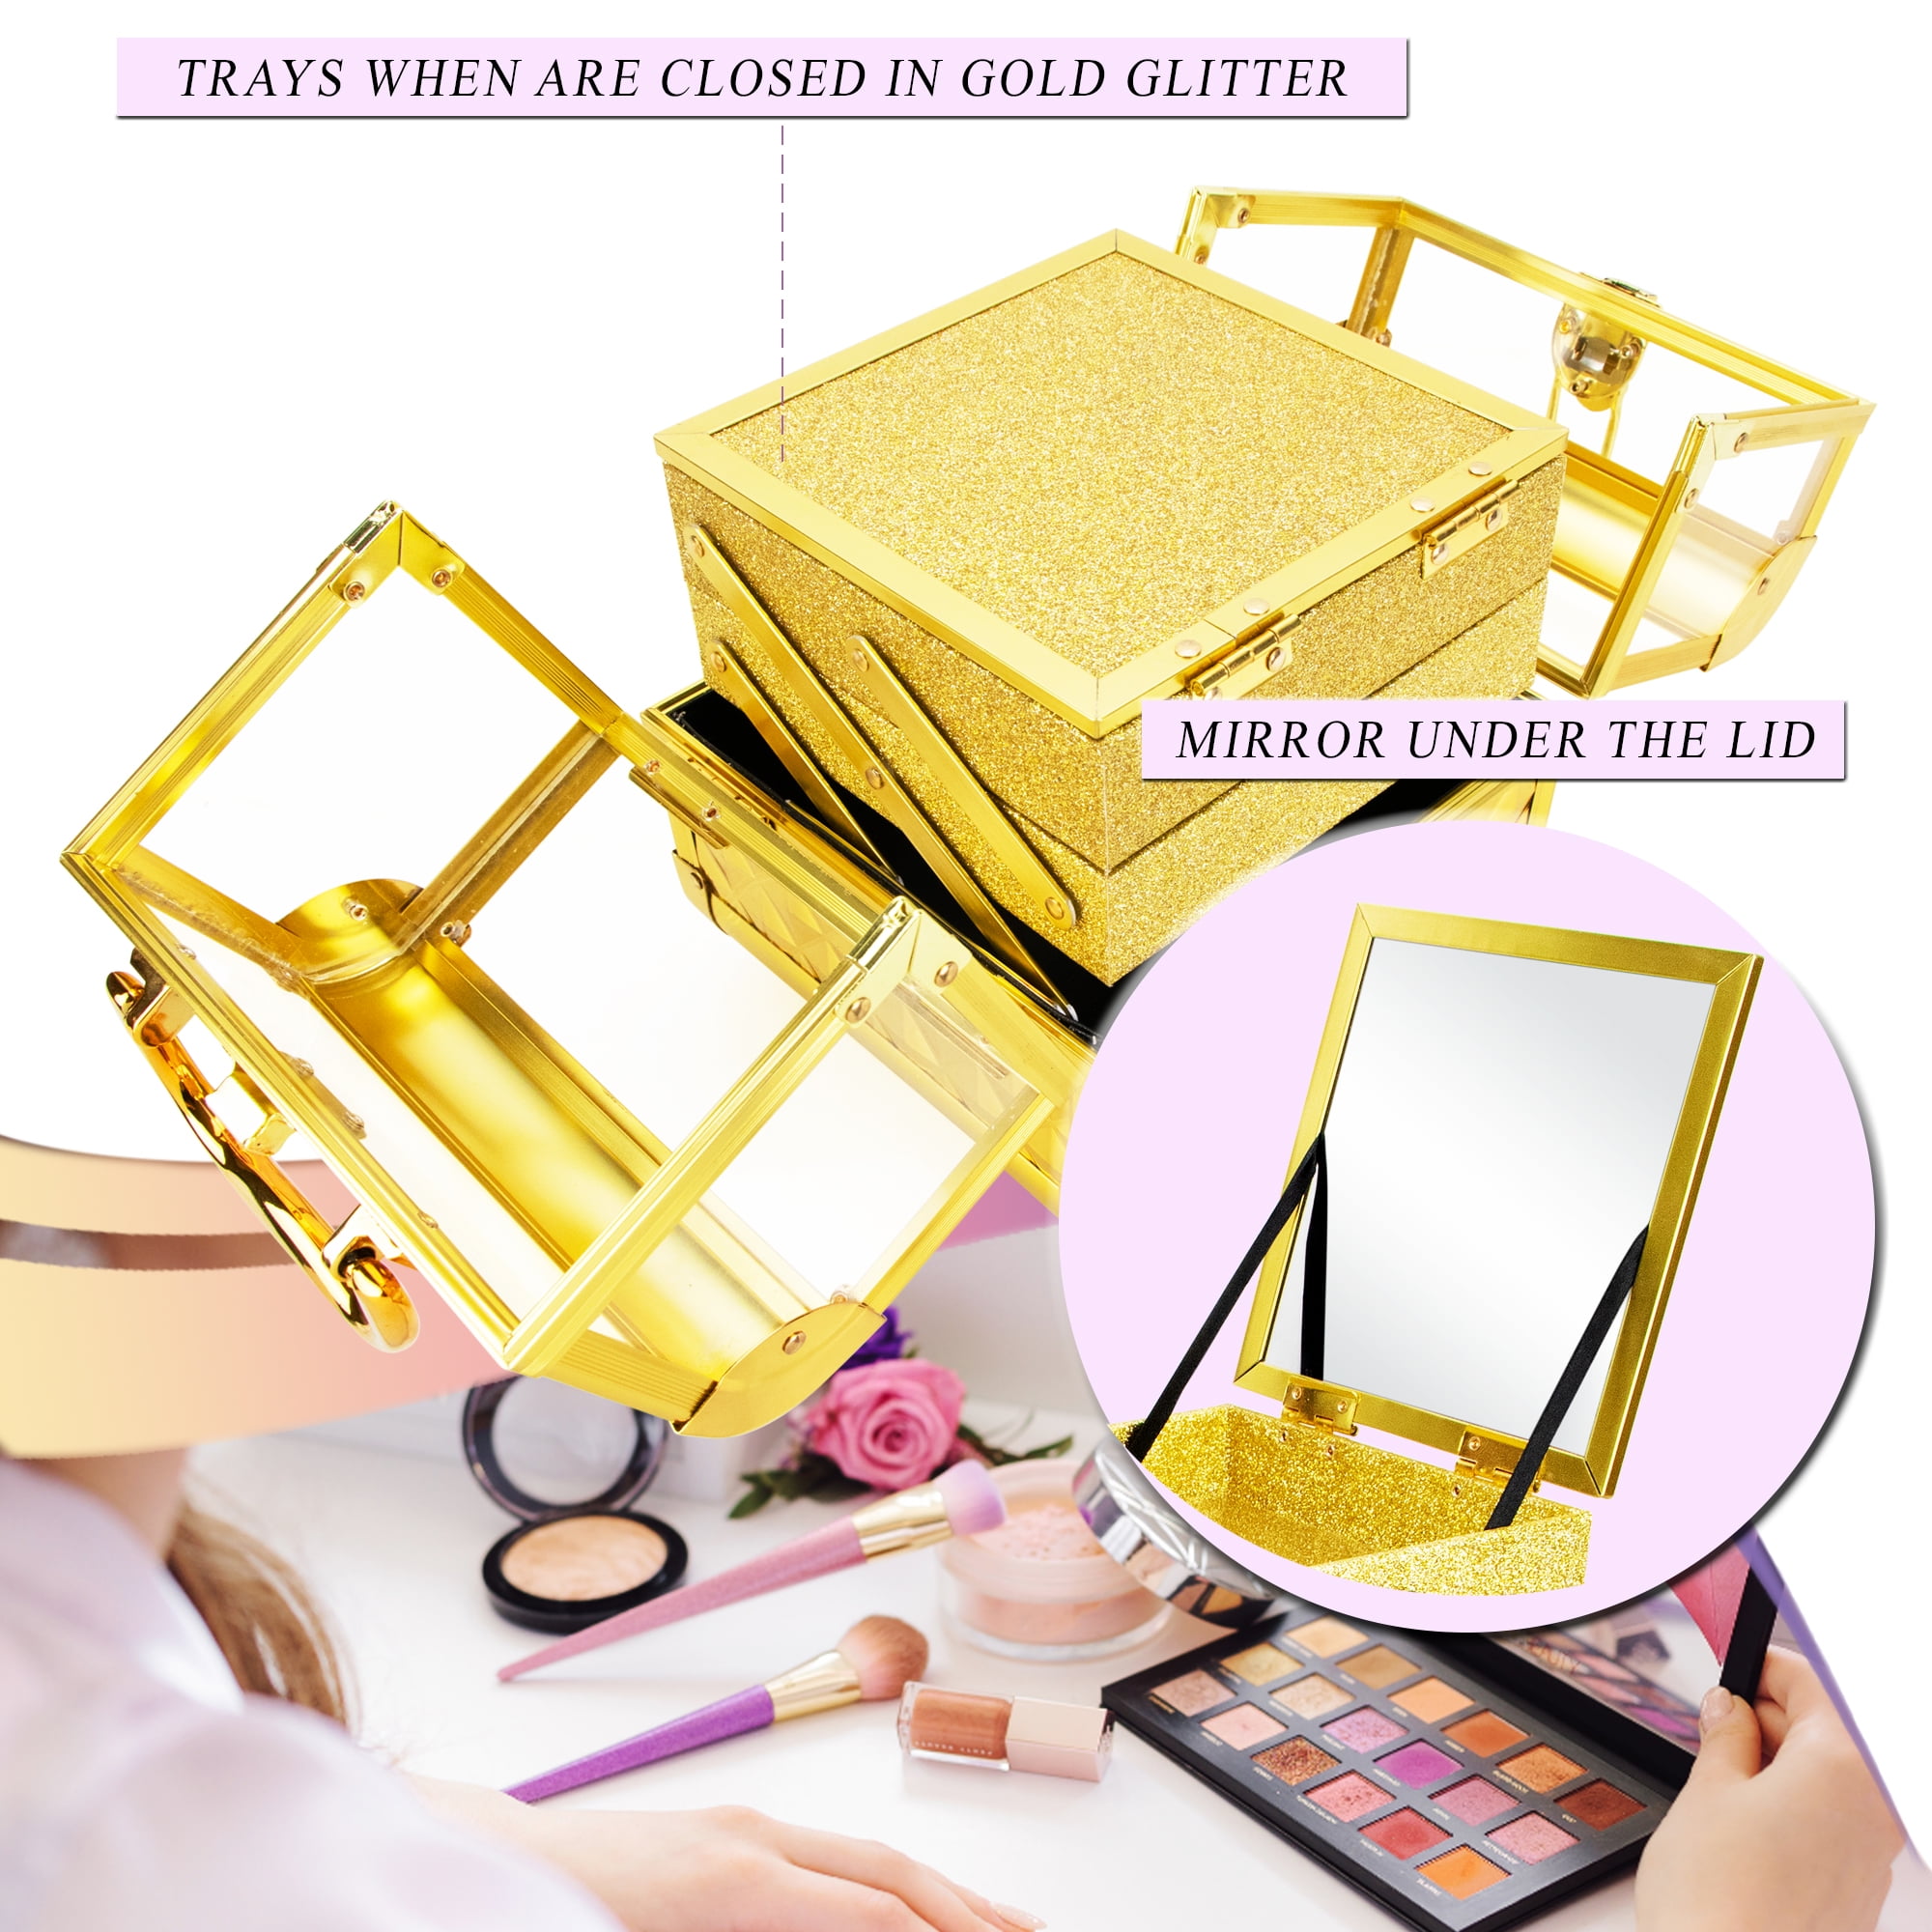 Acrylic Case Professional Makeup Artist Train Case Organizer Makeup Box  Storage in Rose Gold by Ver Beauty-VK00585